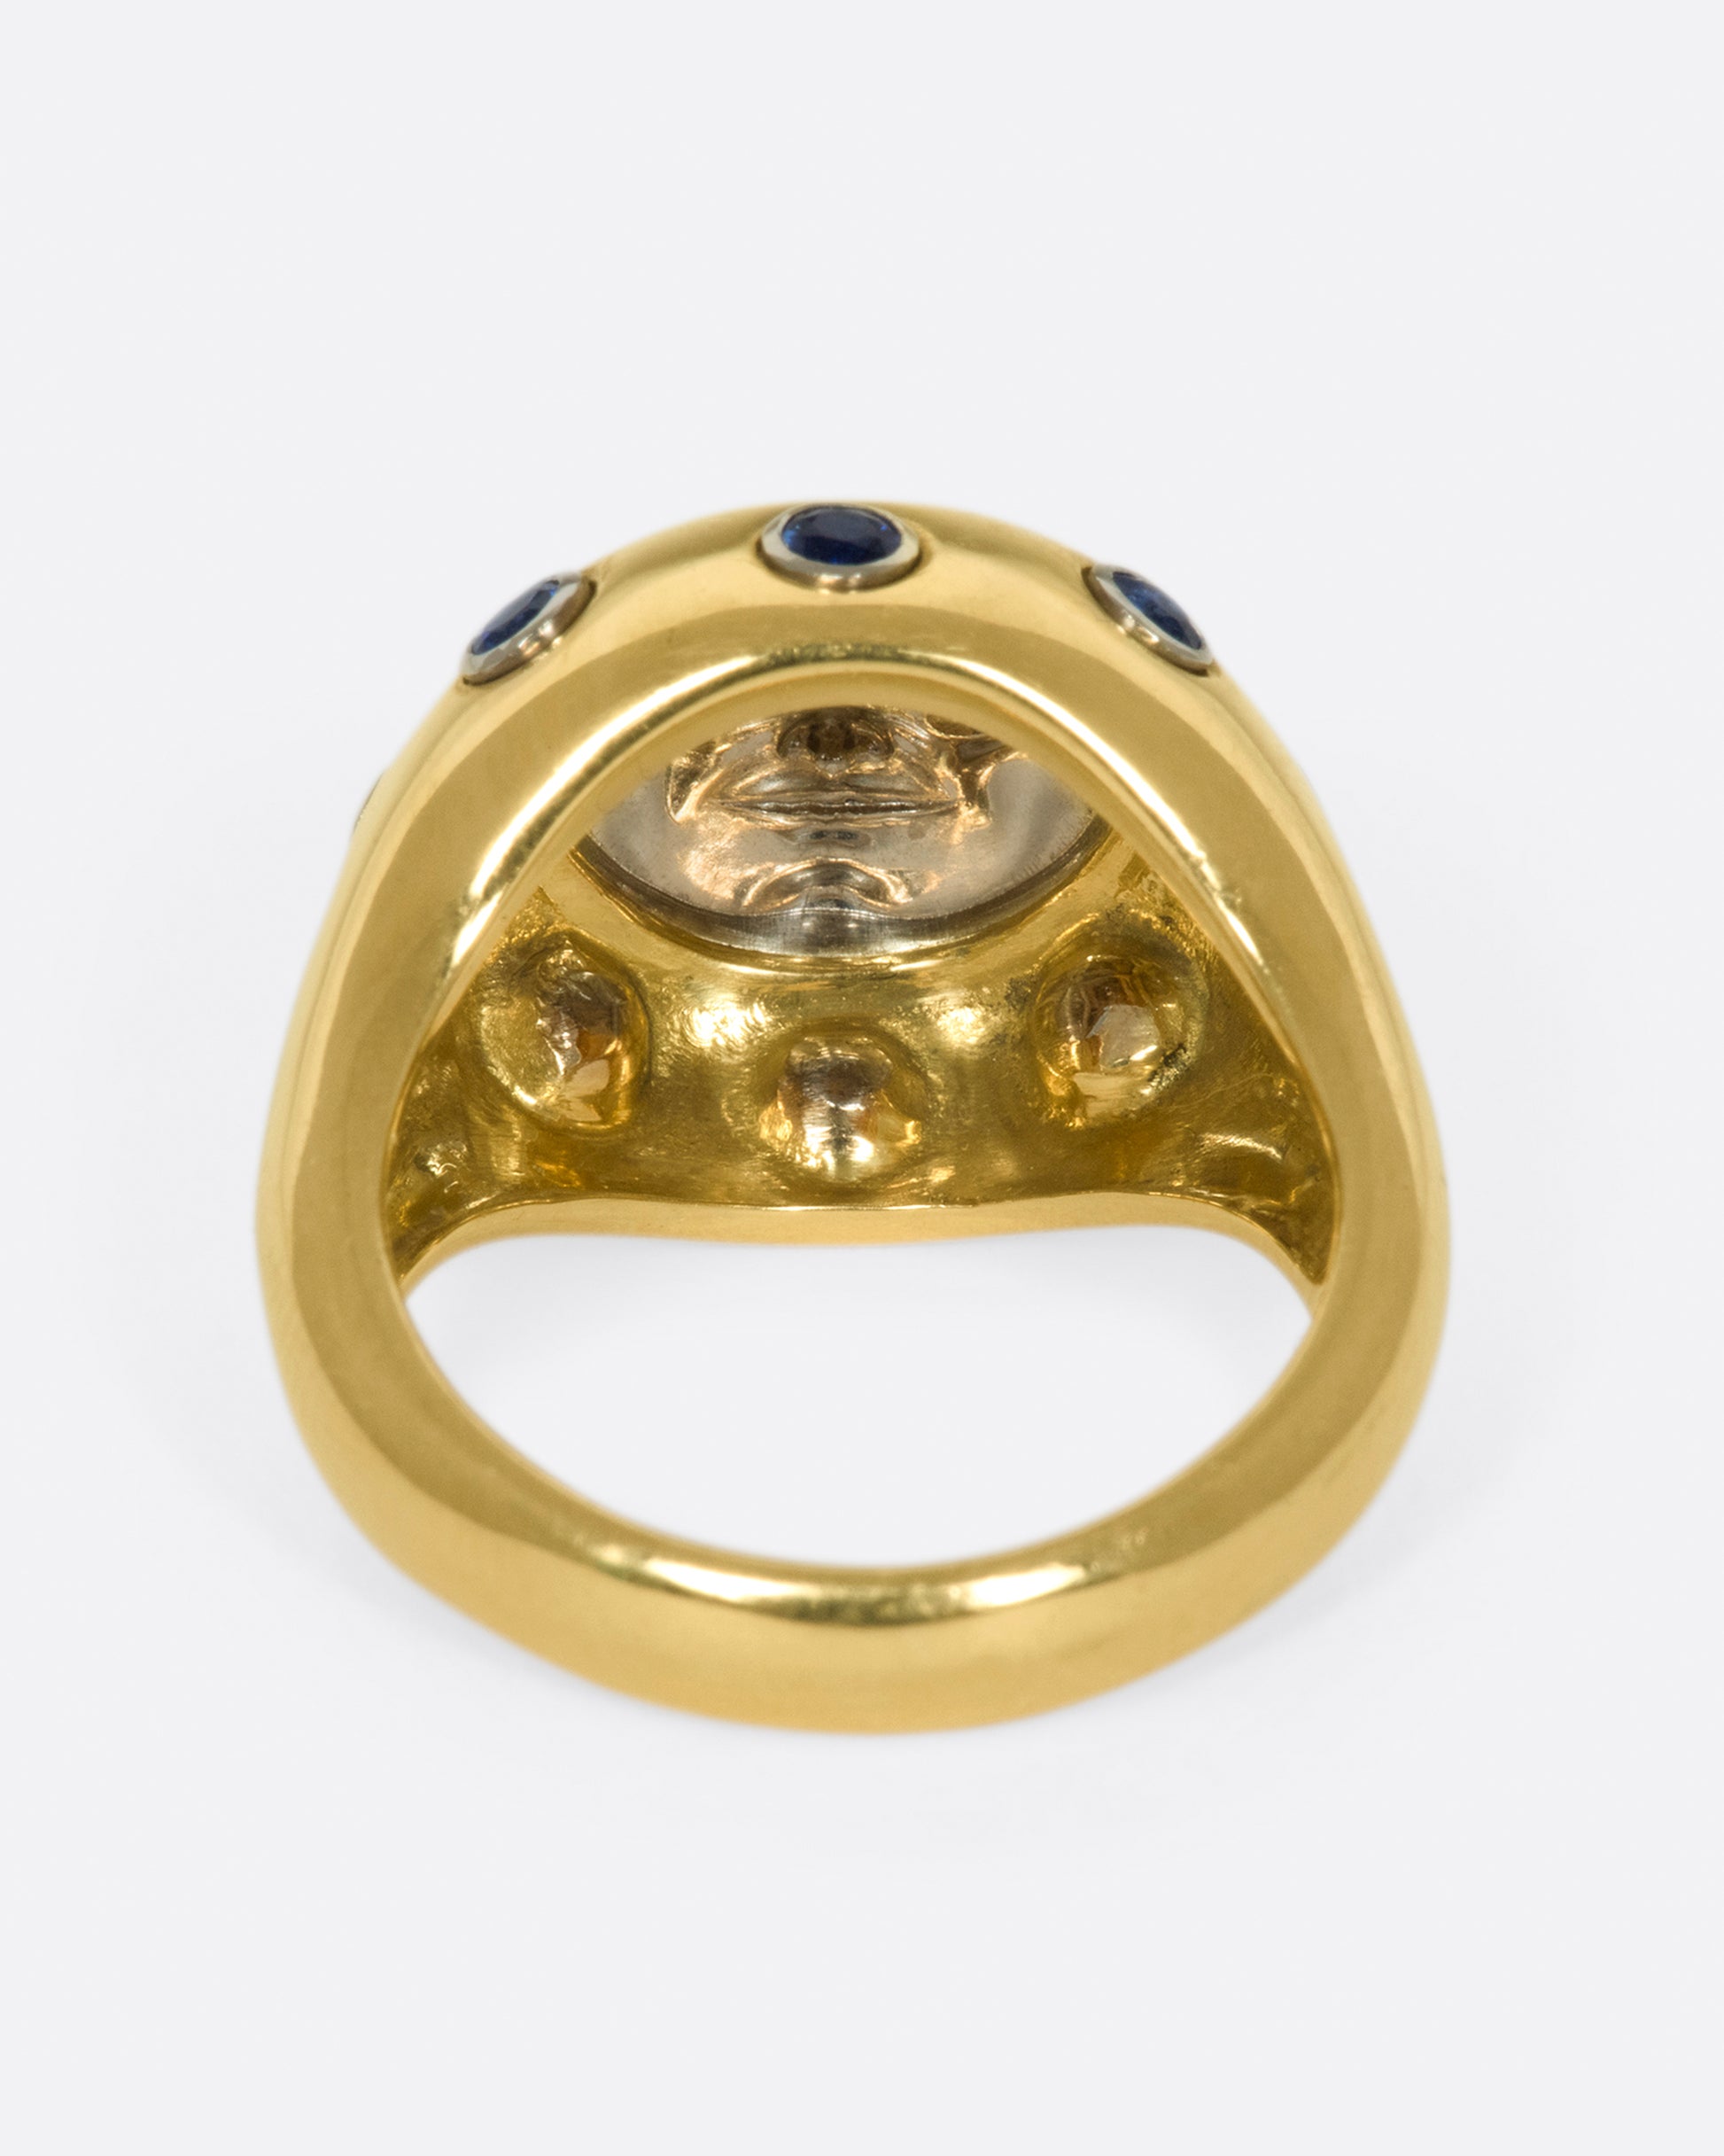 A platinum moonface sunken into a gold ring, surrounded by sapphire cabochons.